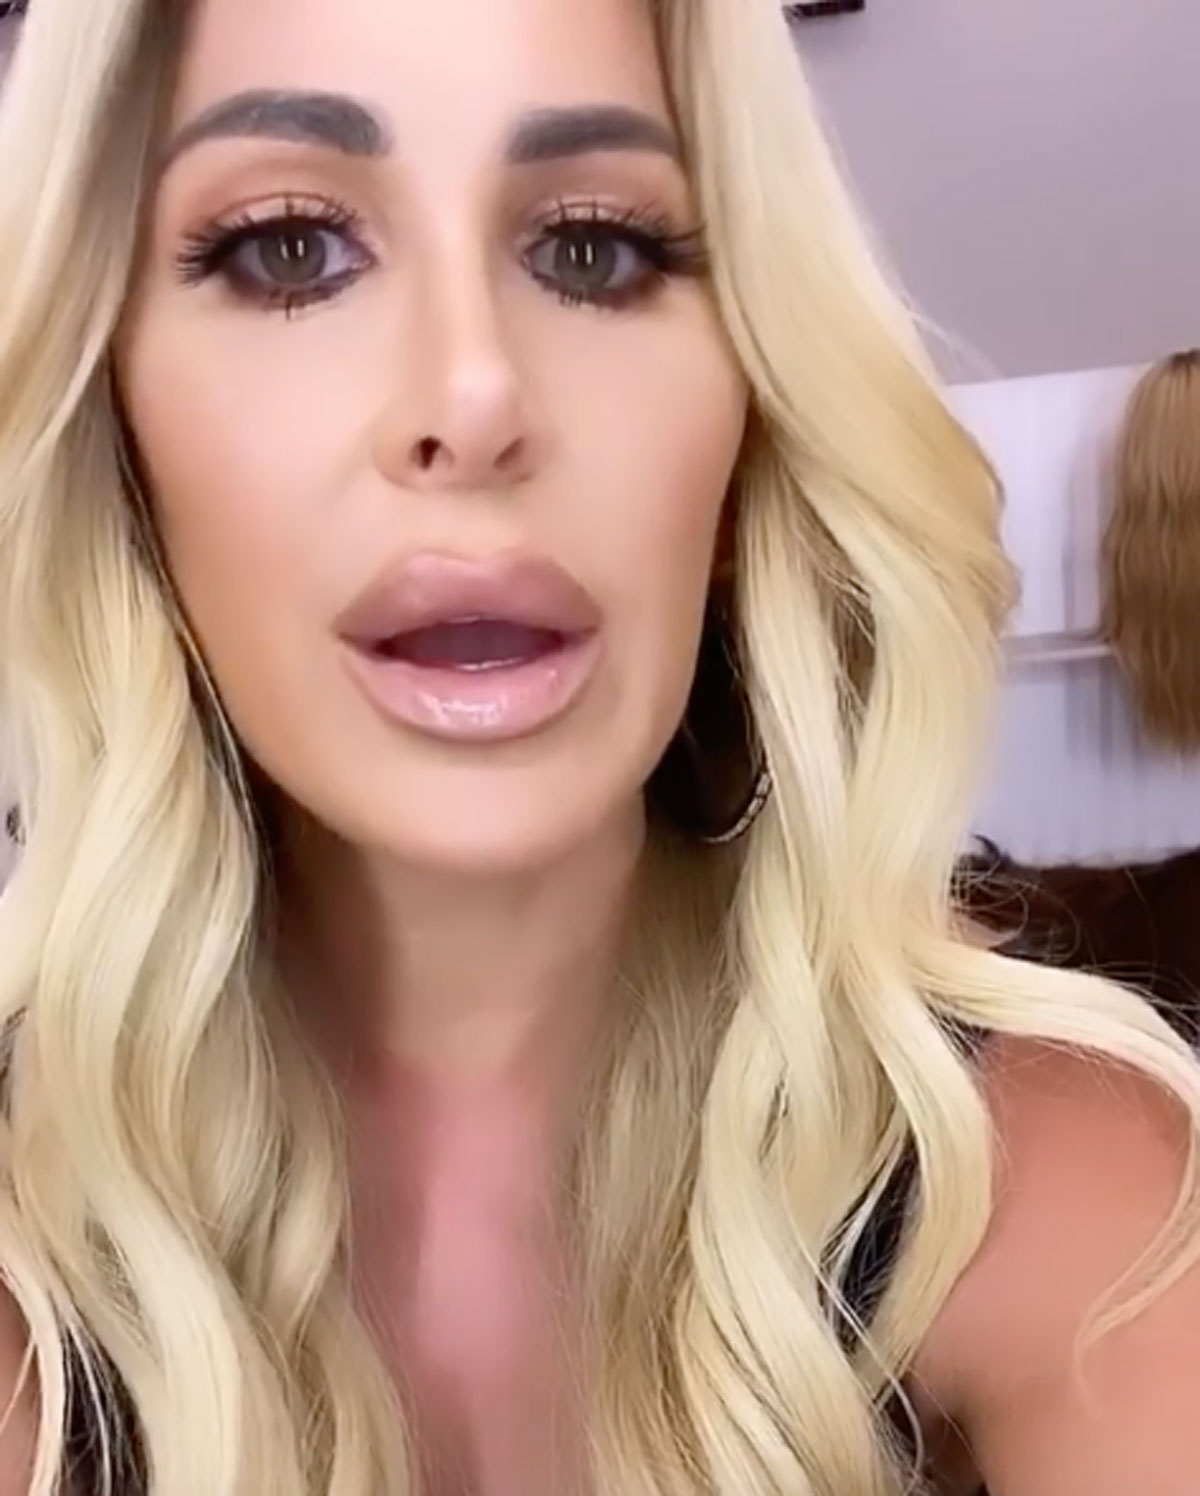 Kim Zolciak Confesses To Getting Botox And Lip Fillers With Brielle 